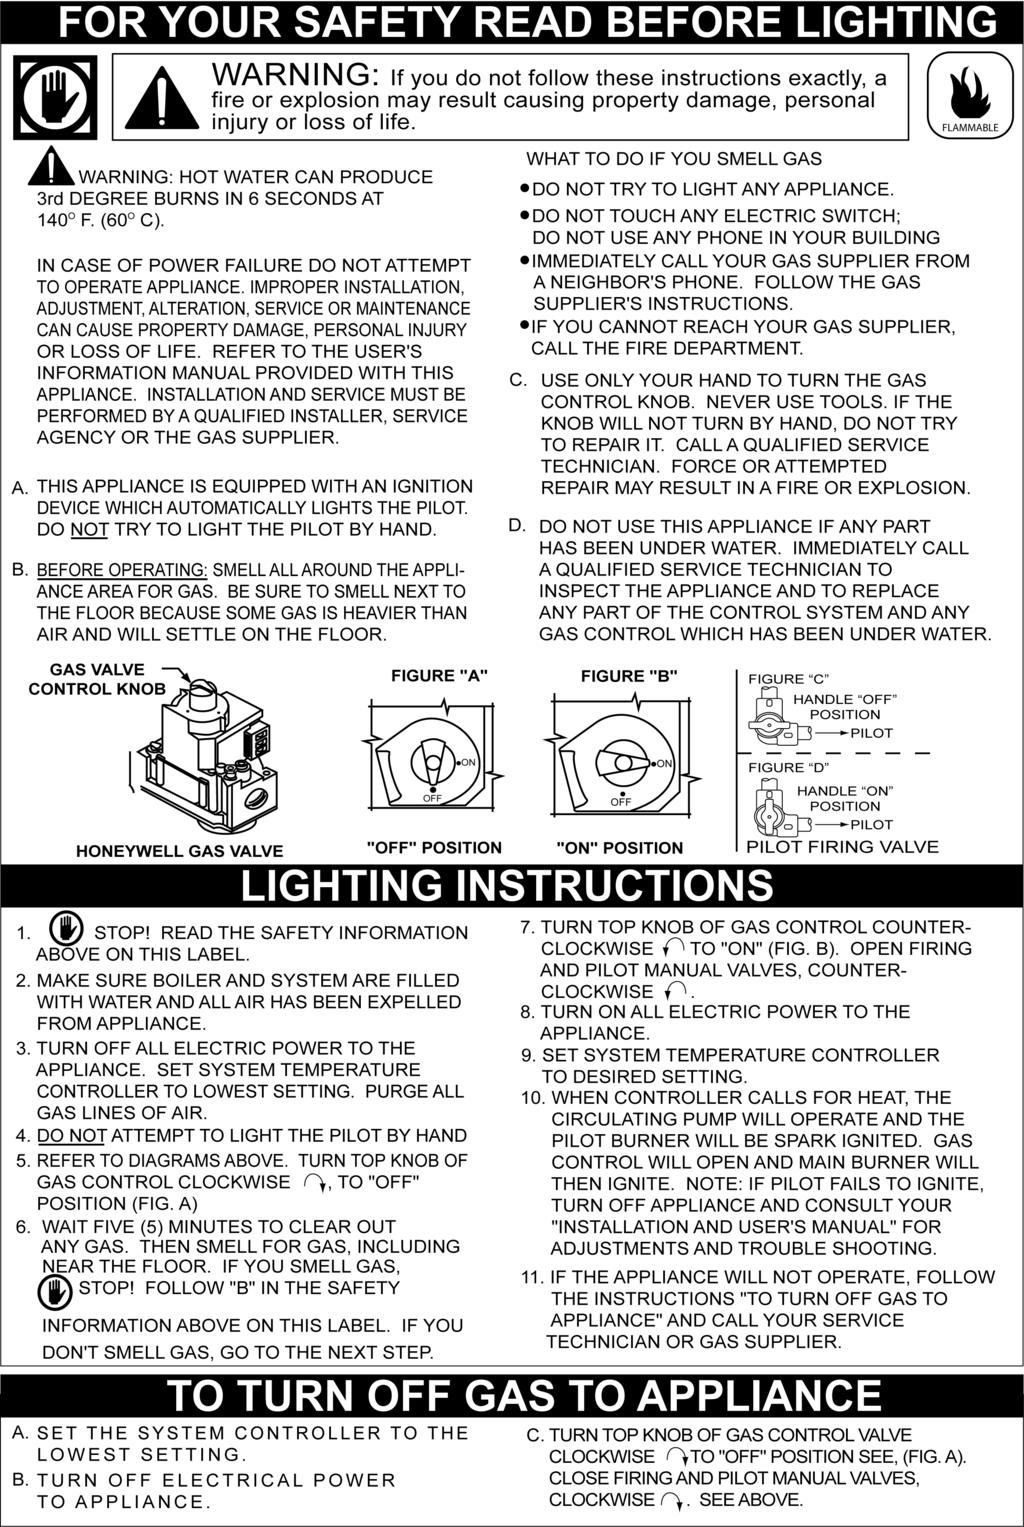 LIGHTING AND OPERATING INSTRUCTIONS